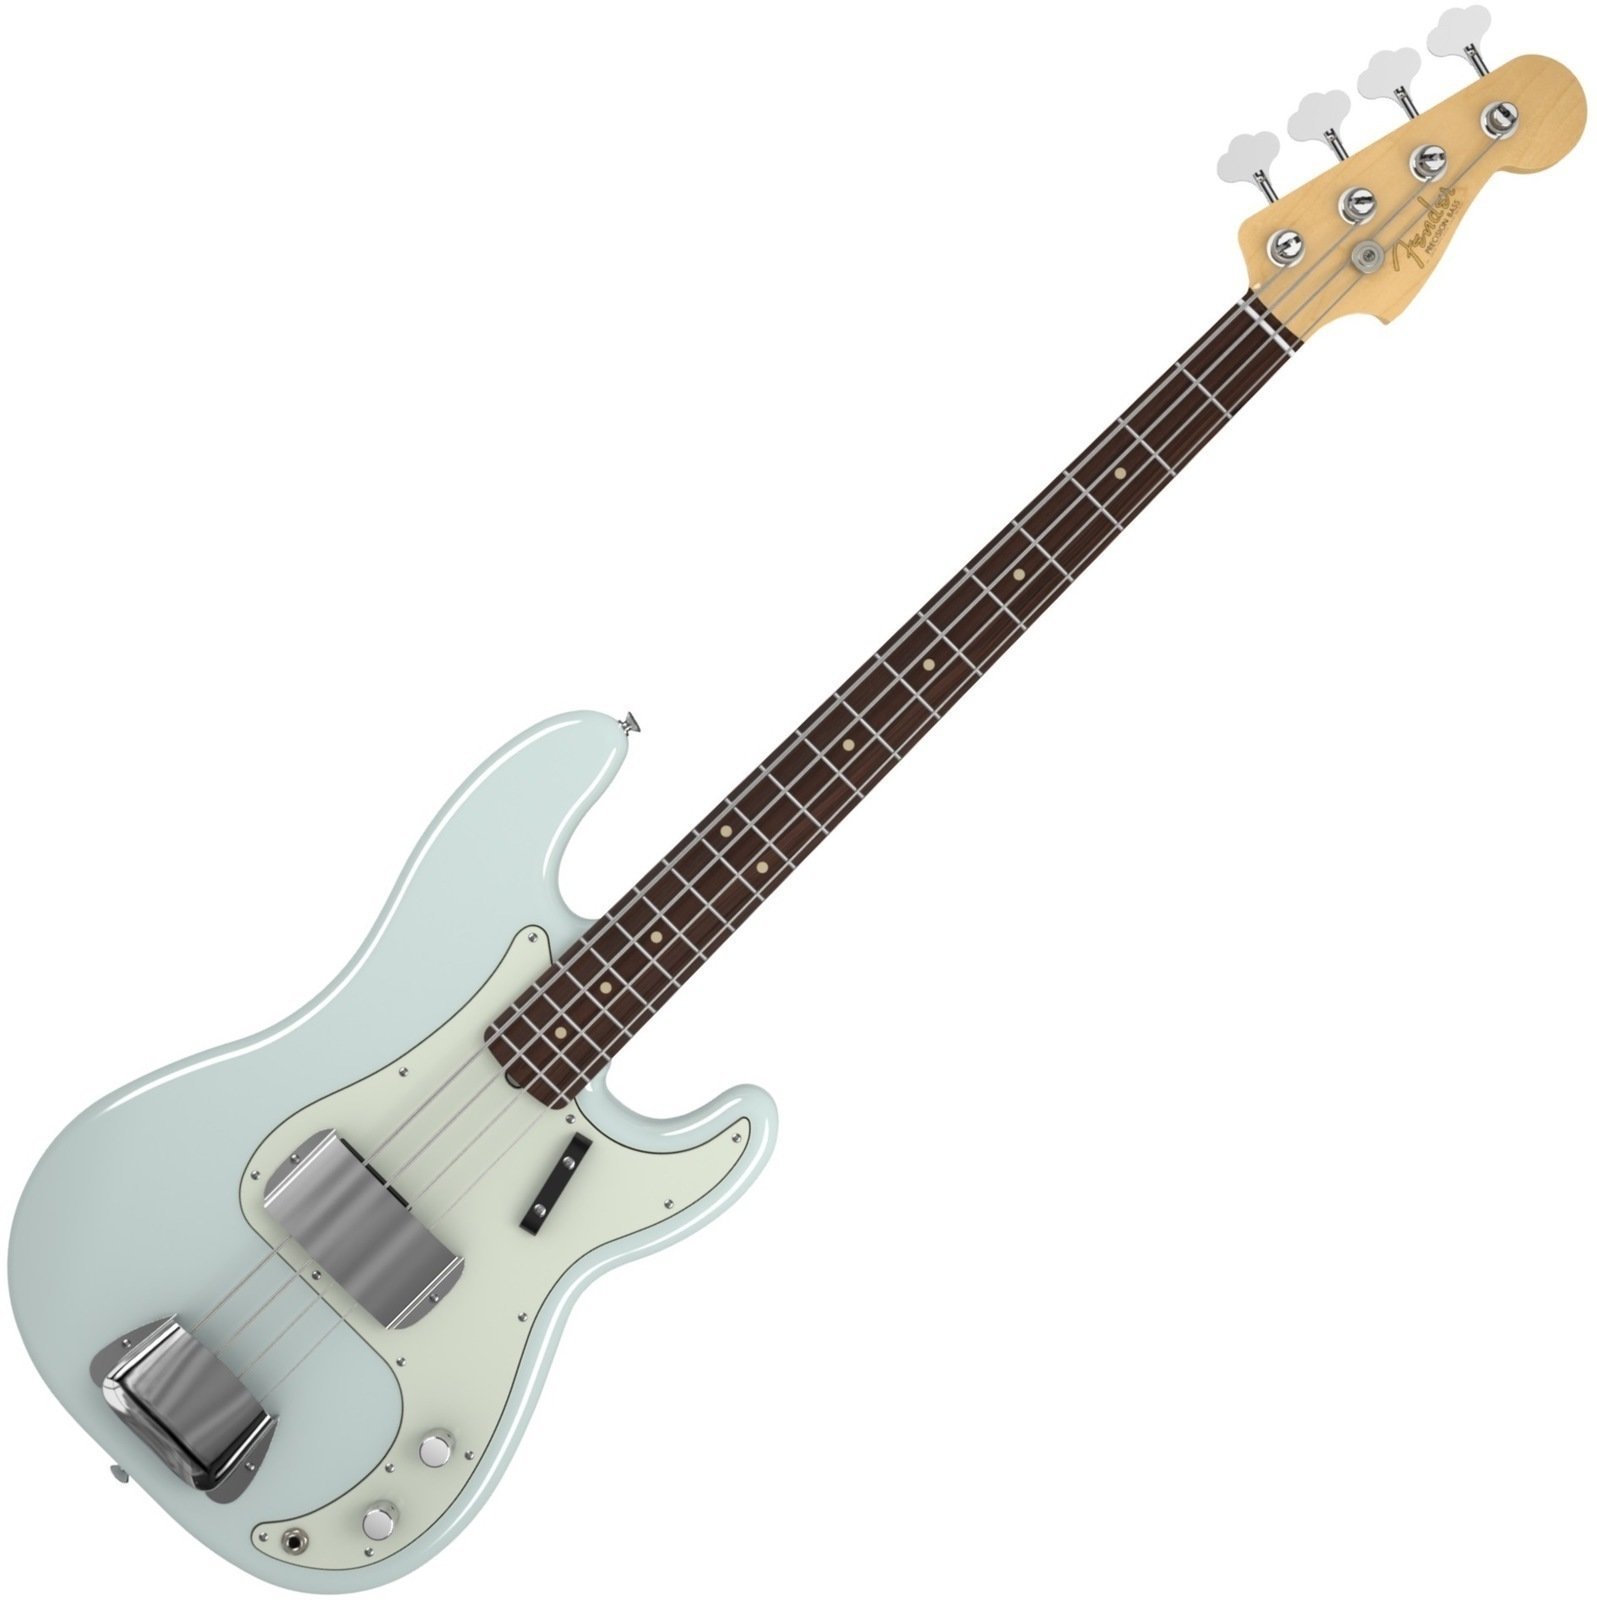 E-Bass Fender American Vintage '63 Precision Bass, Rosewood Fingerboard, Faded Sonic Blue